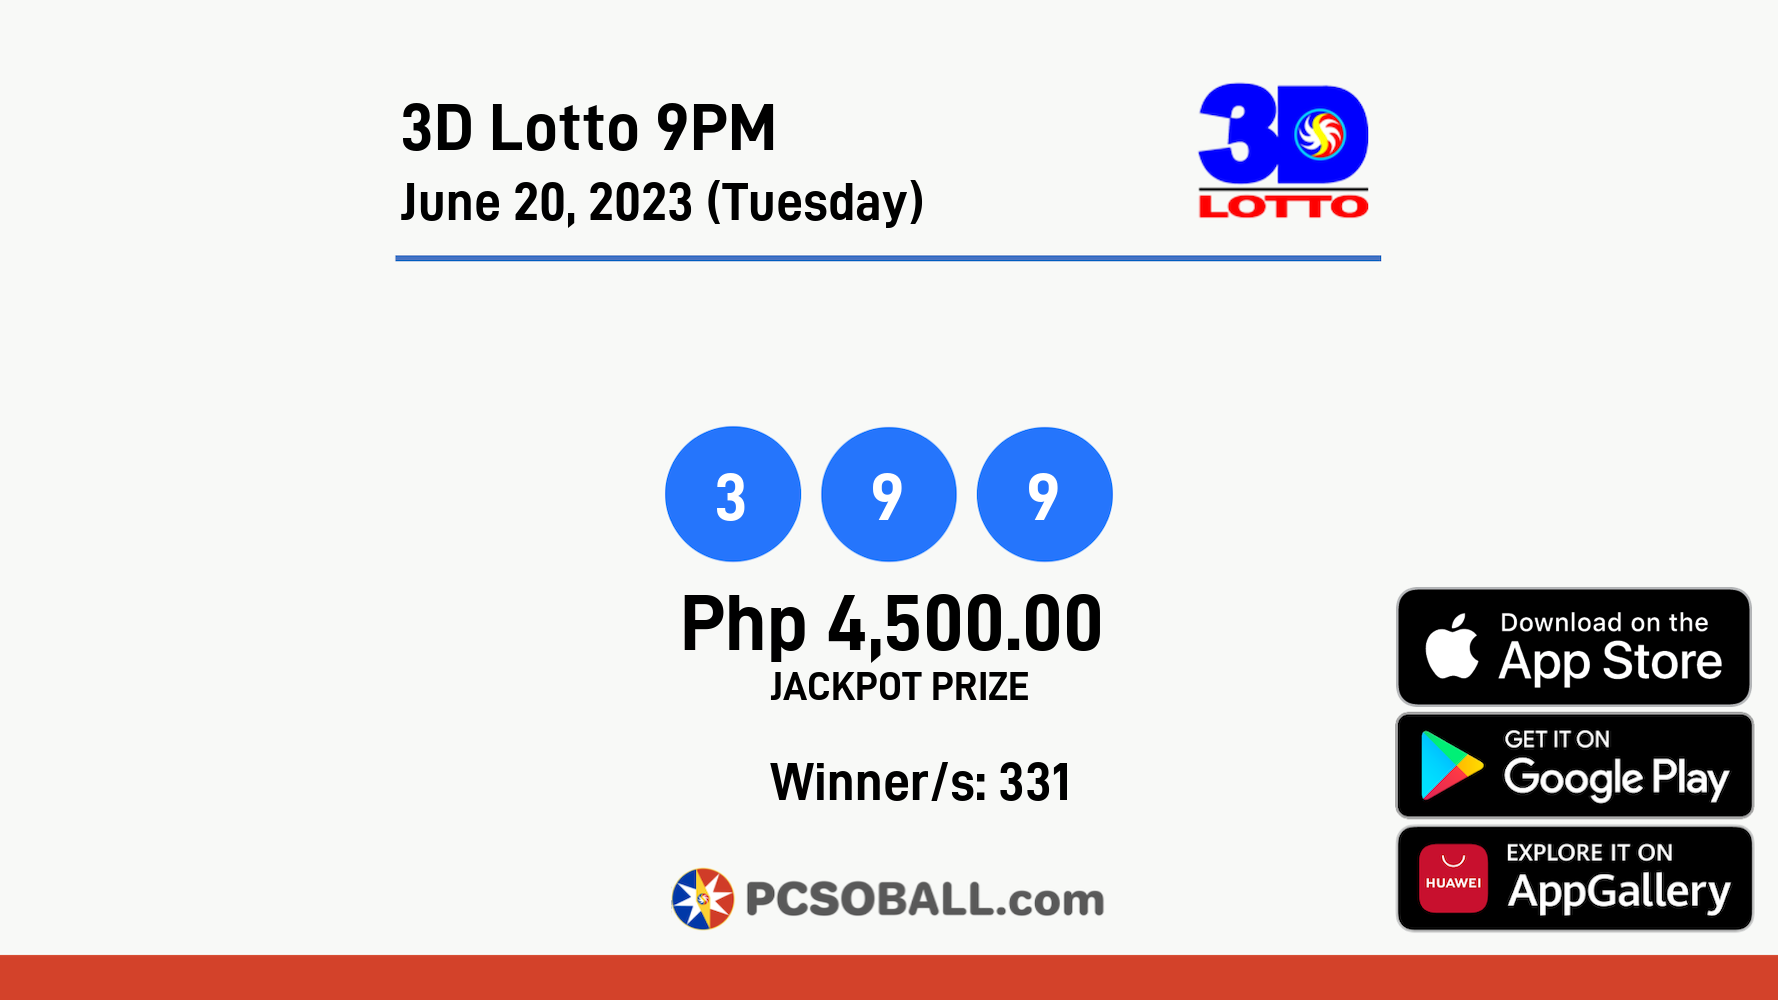 3D Lotto 9PM June 20, 2023 (Tuesday) Result